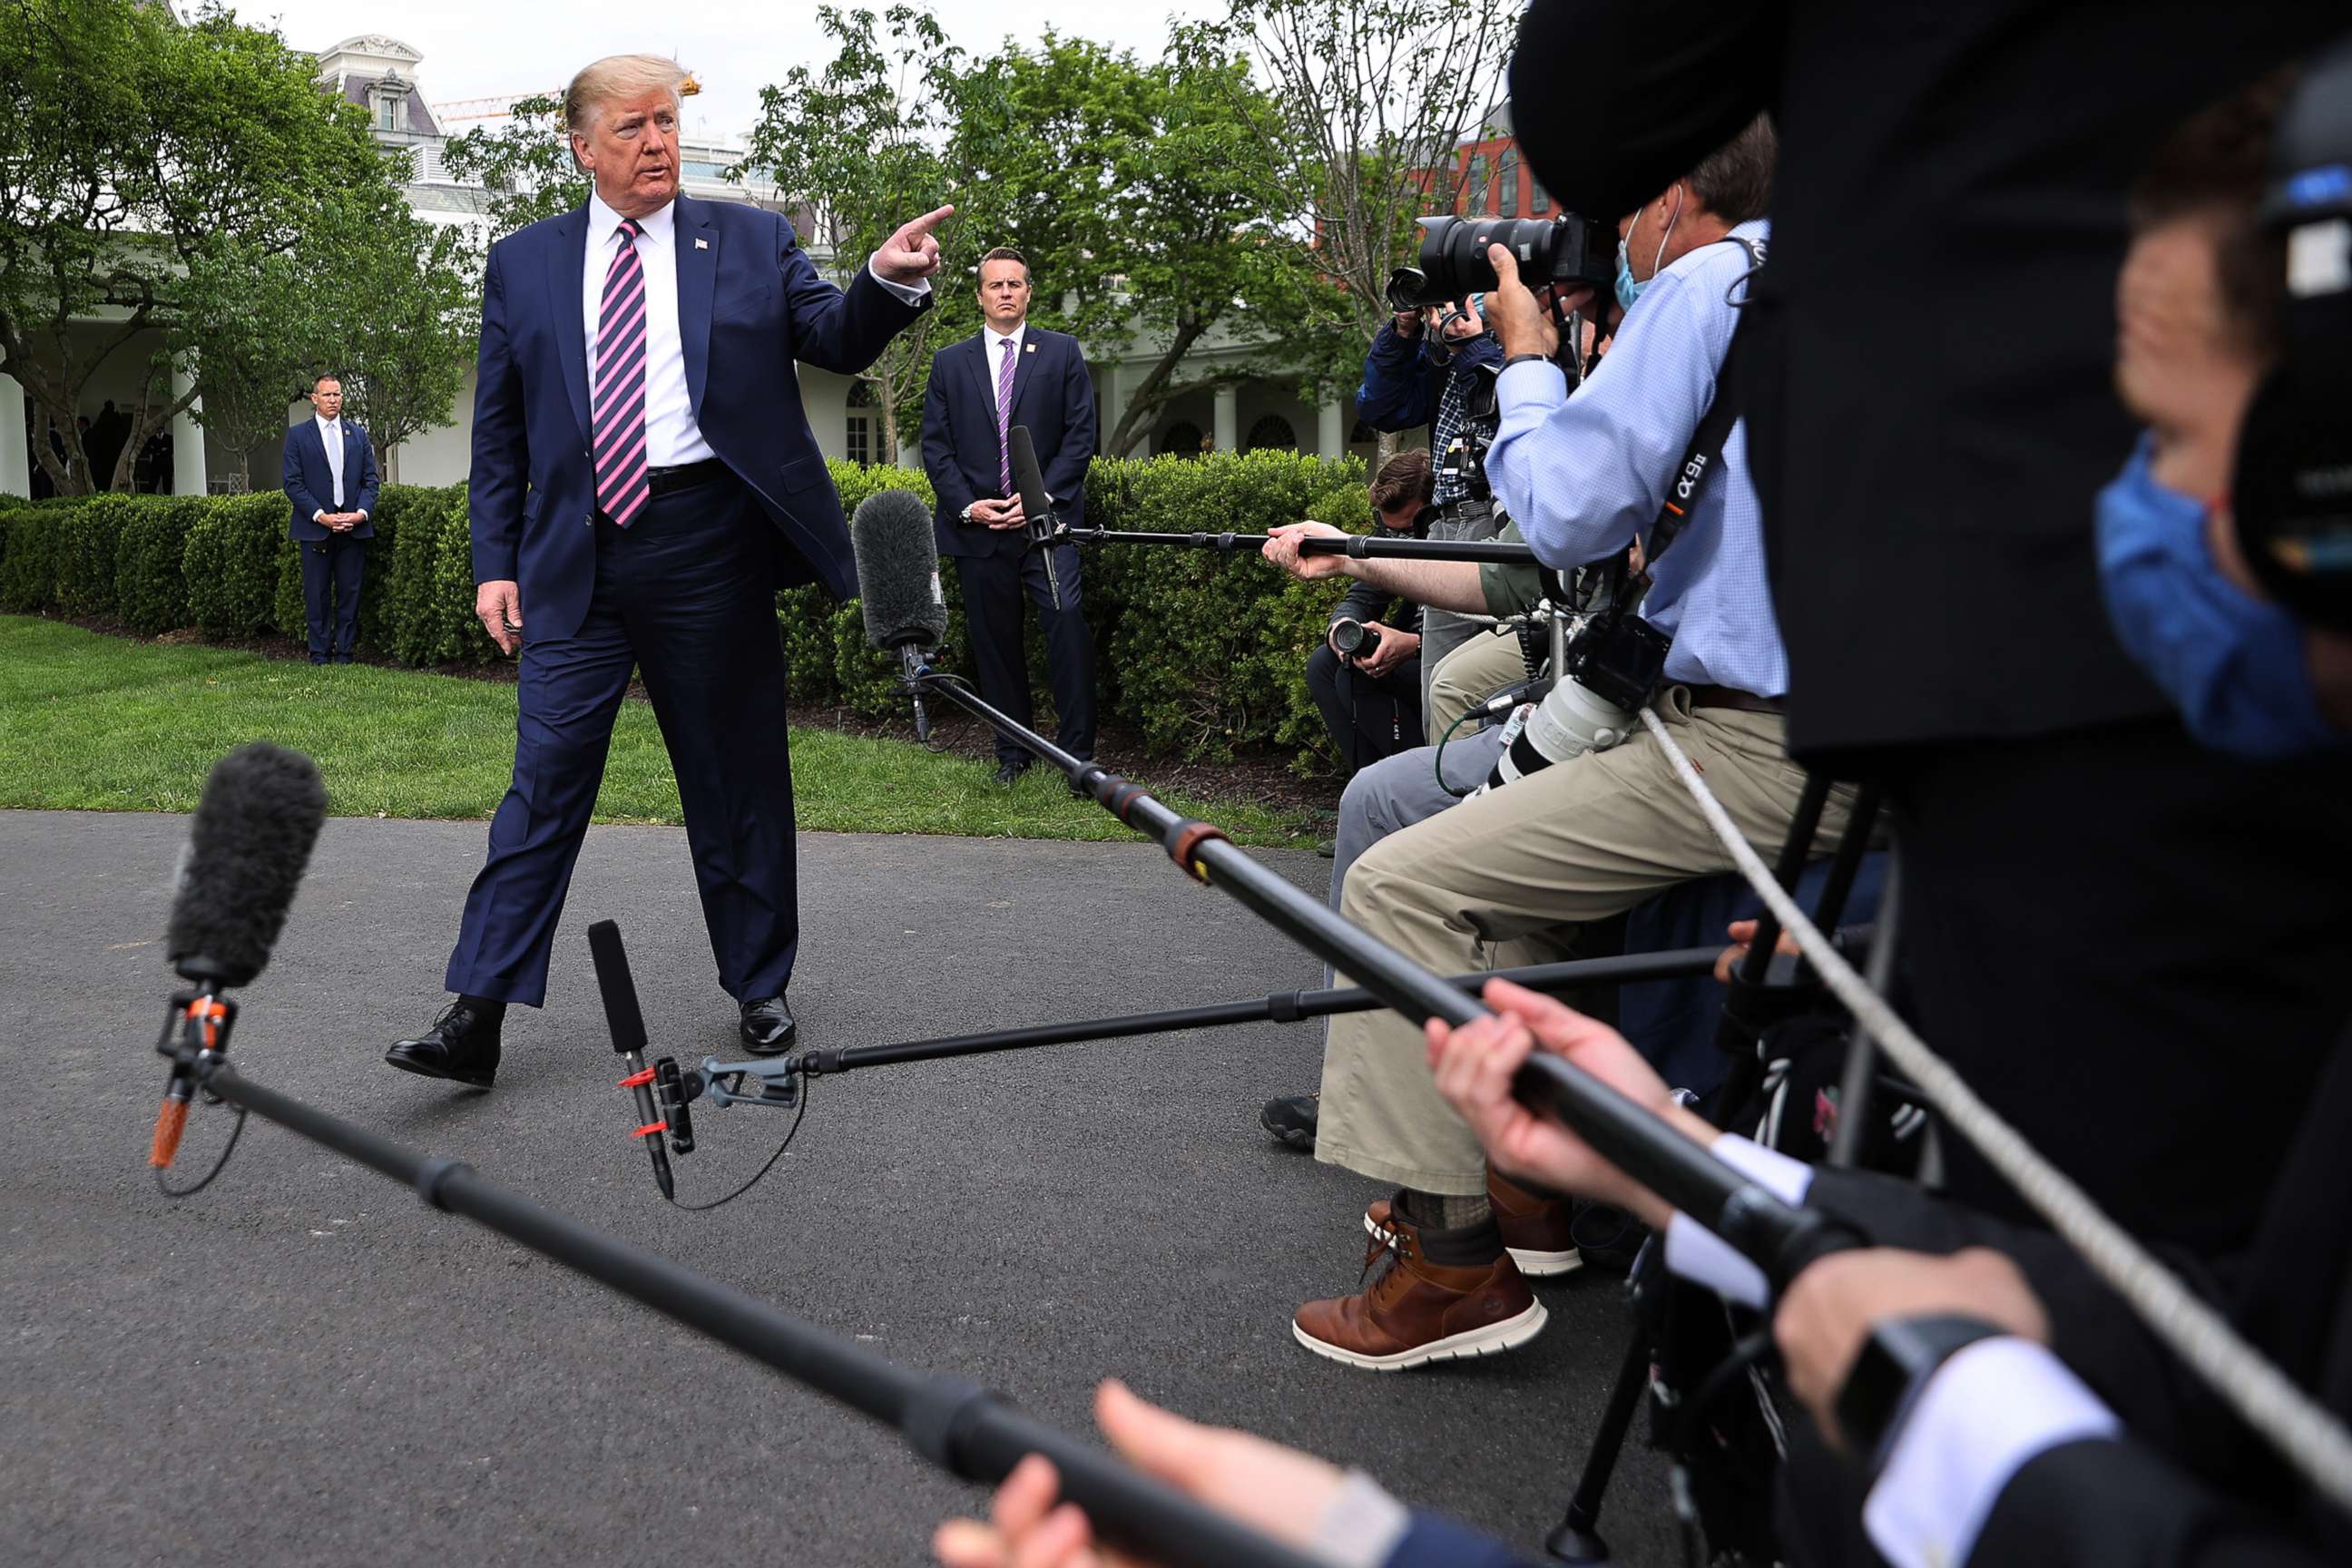 PHOTO: President Donald Trump talks to journalists as he departs the White House, May 5, 2020.